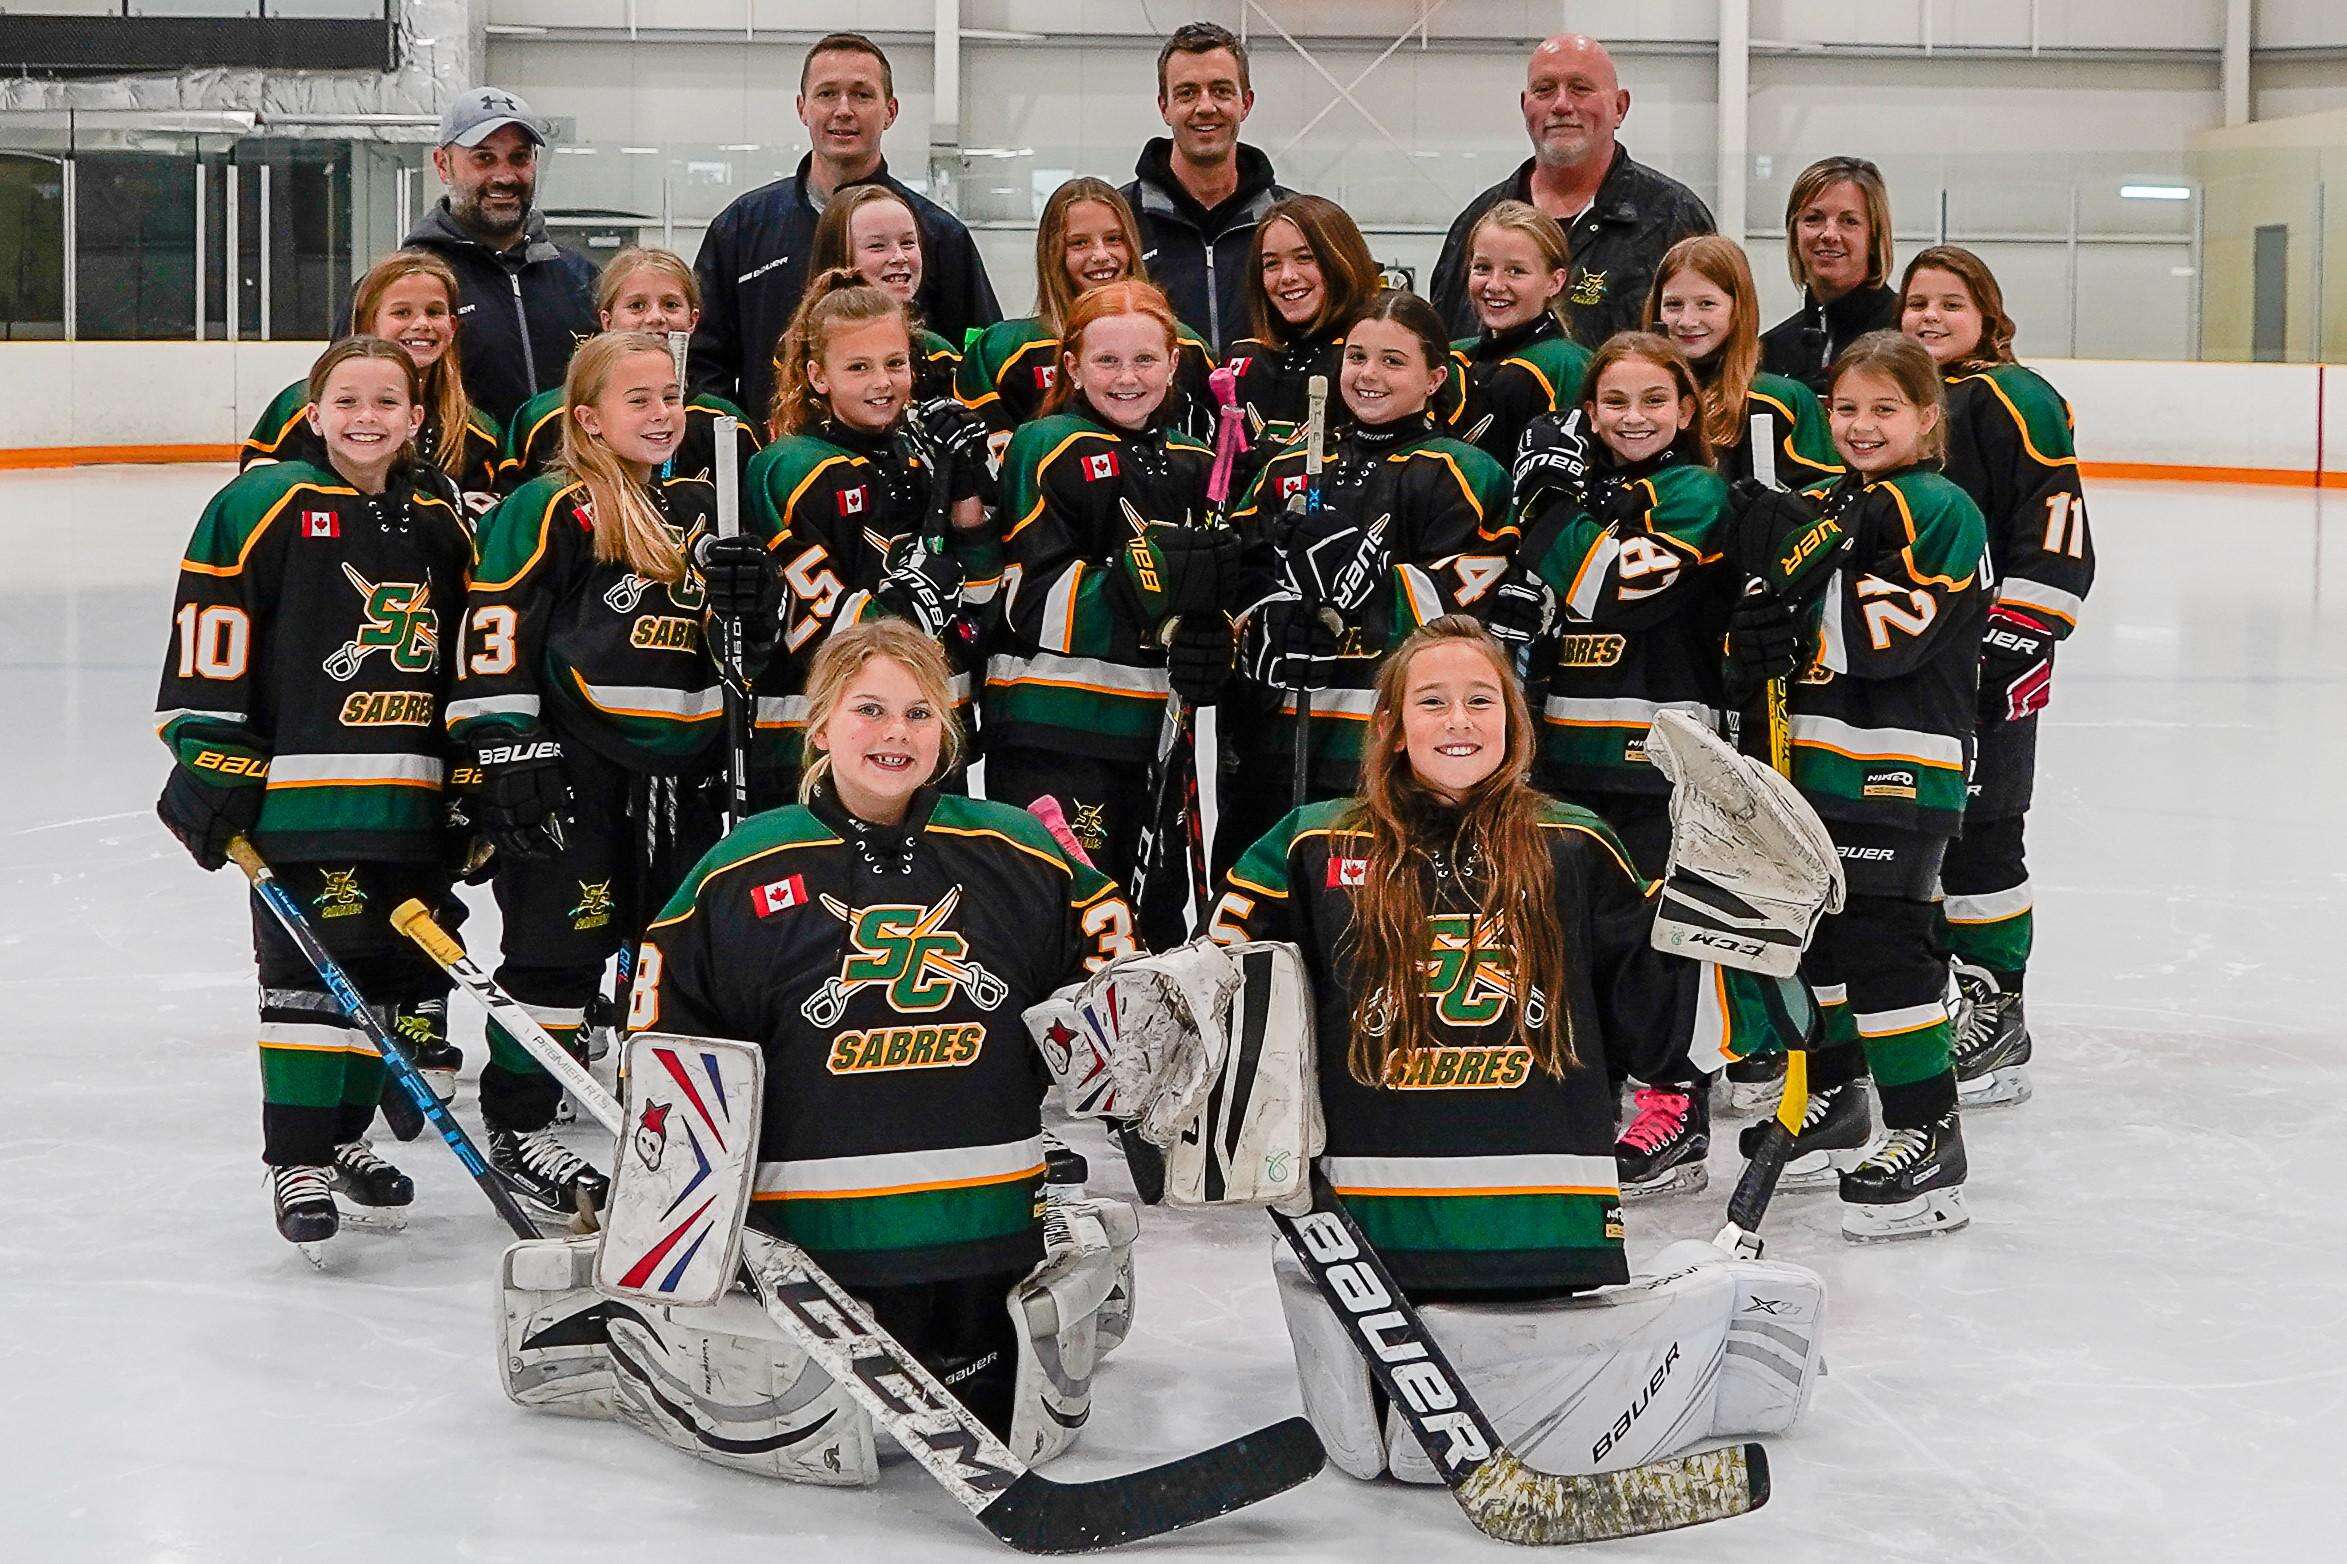 U11 AA - Rochester Fire on Ice - Silver Medalists